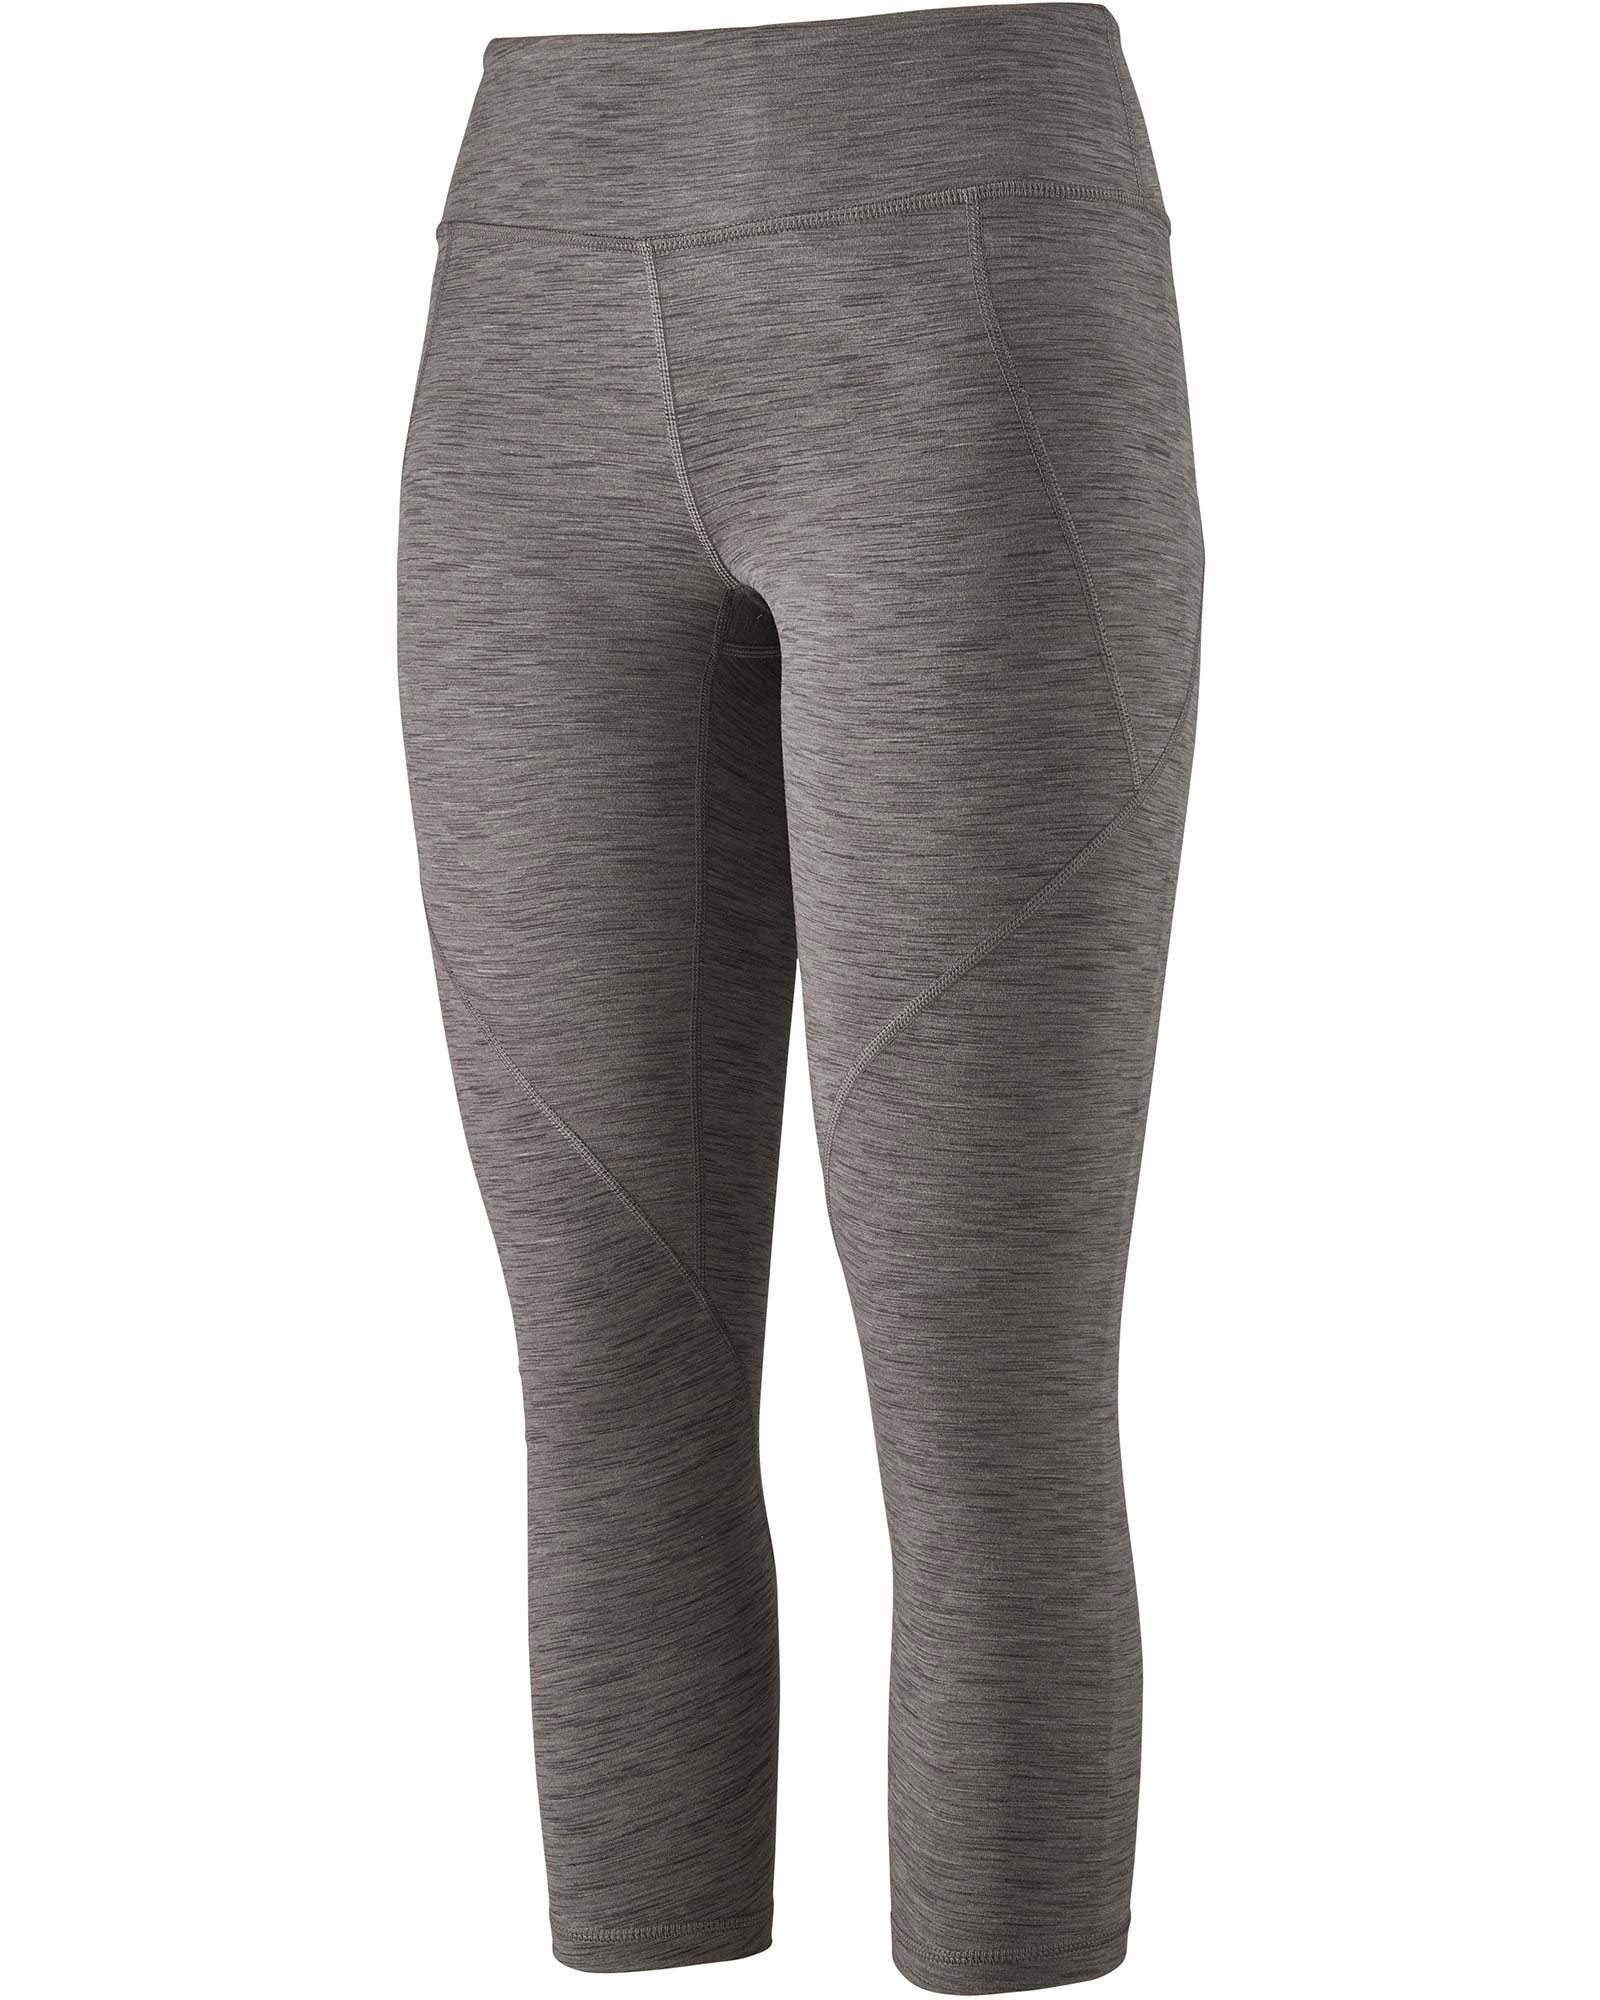 Patagonia Centered Crops Women’s Tights - Space Dye/Narwhal Grey S